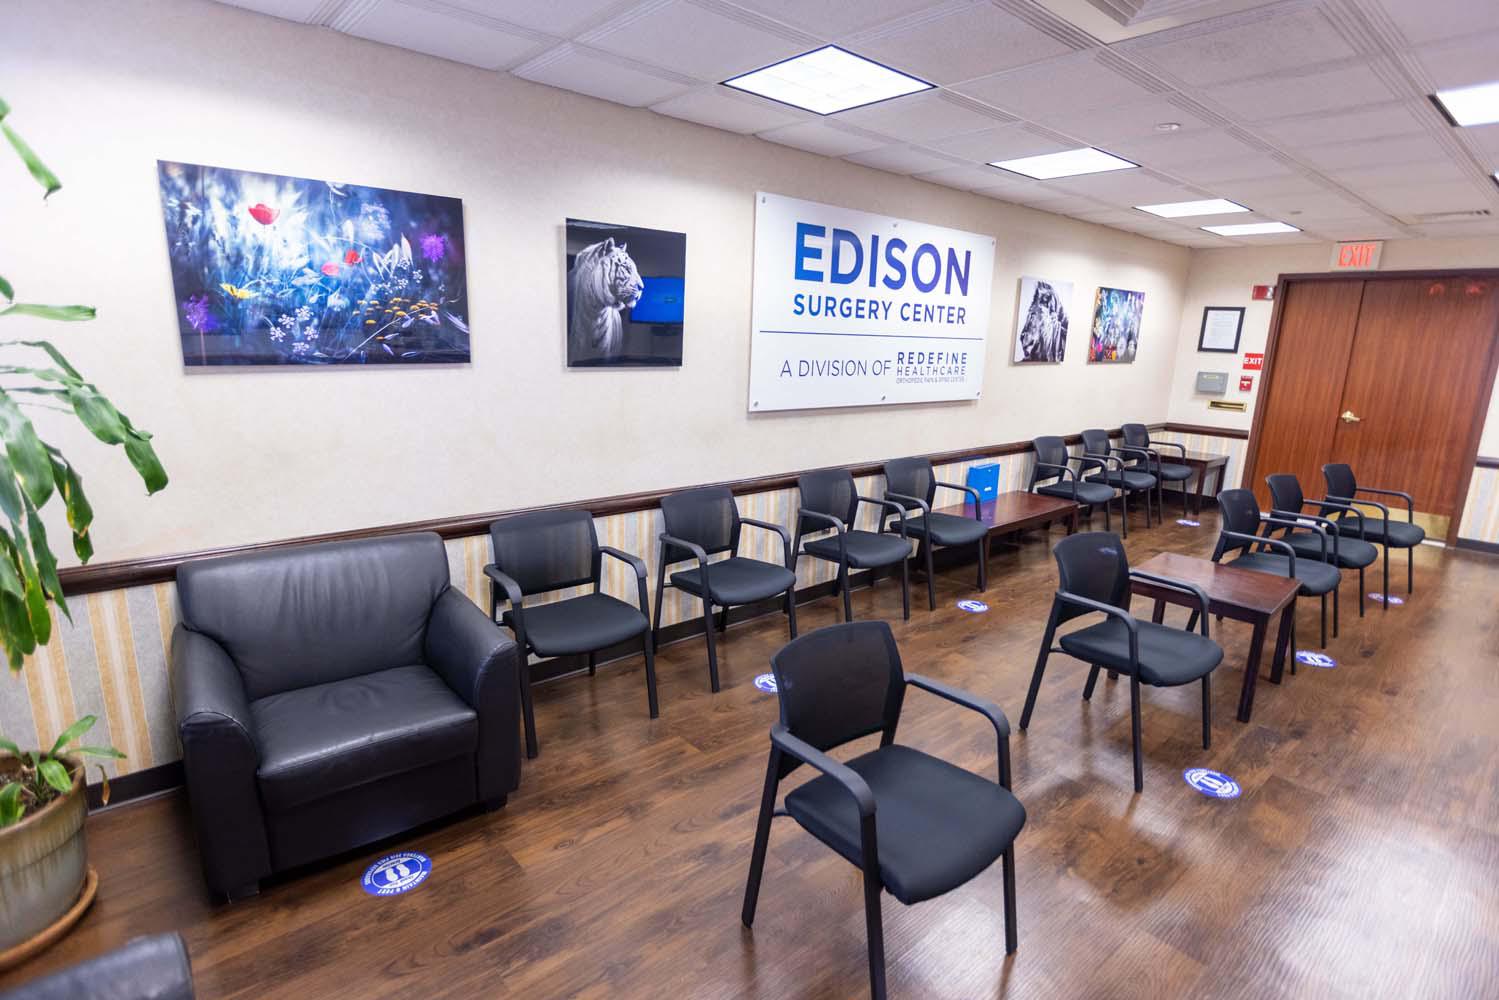 Interventional Pain Management and Rehabilitation Center in New Jersey Redefine Healthcare - Edison, NJ Edison (732)906-9600